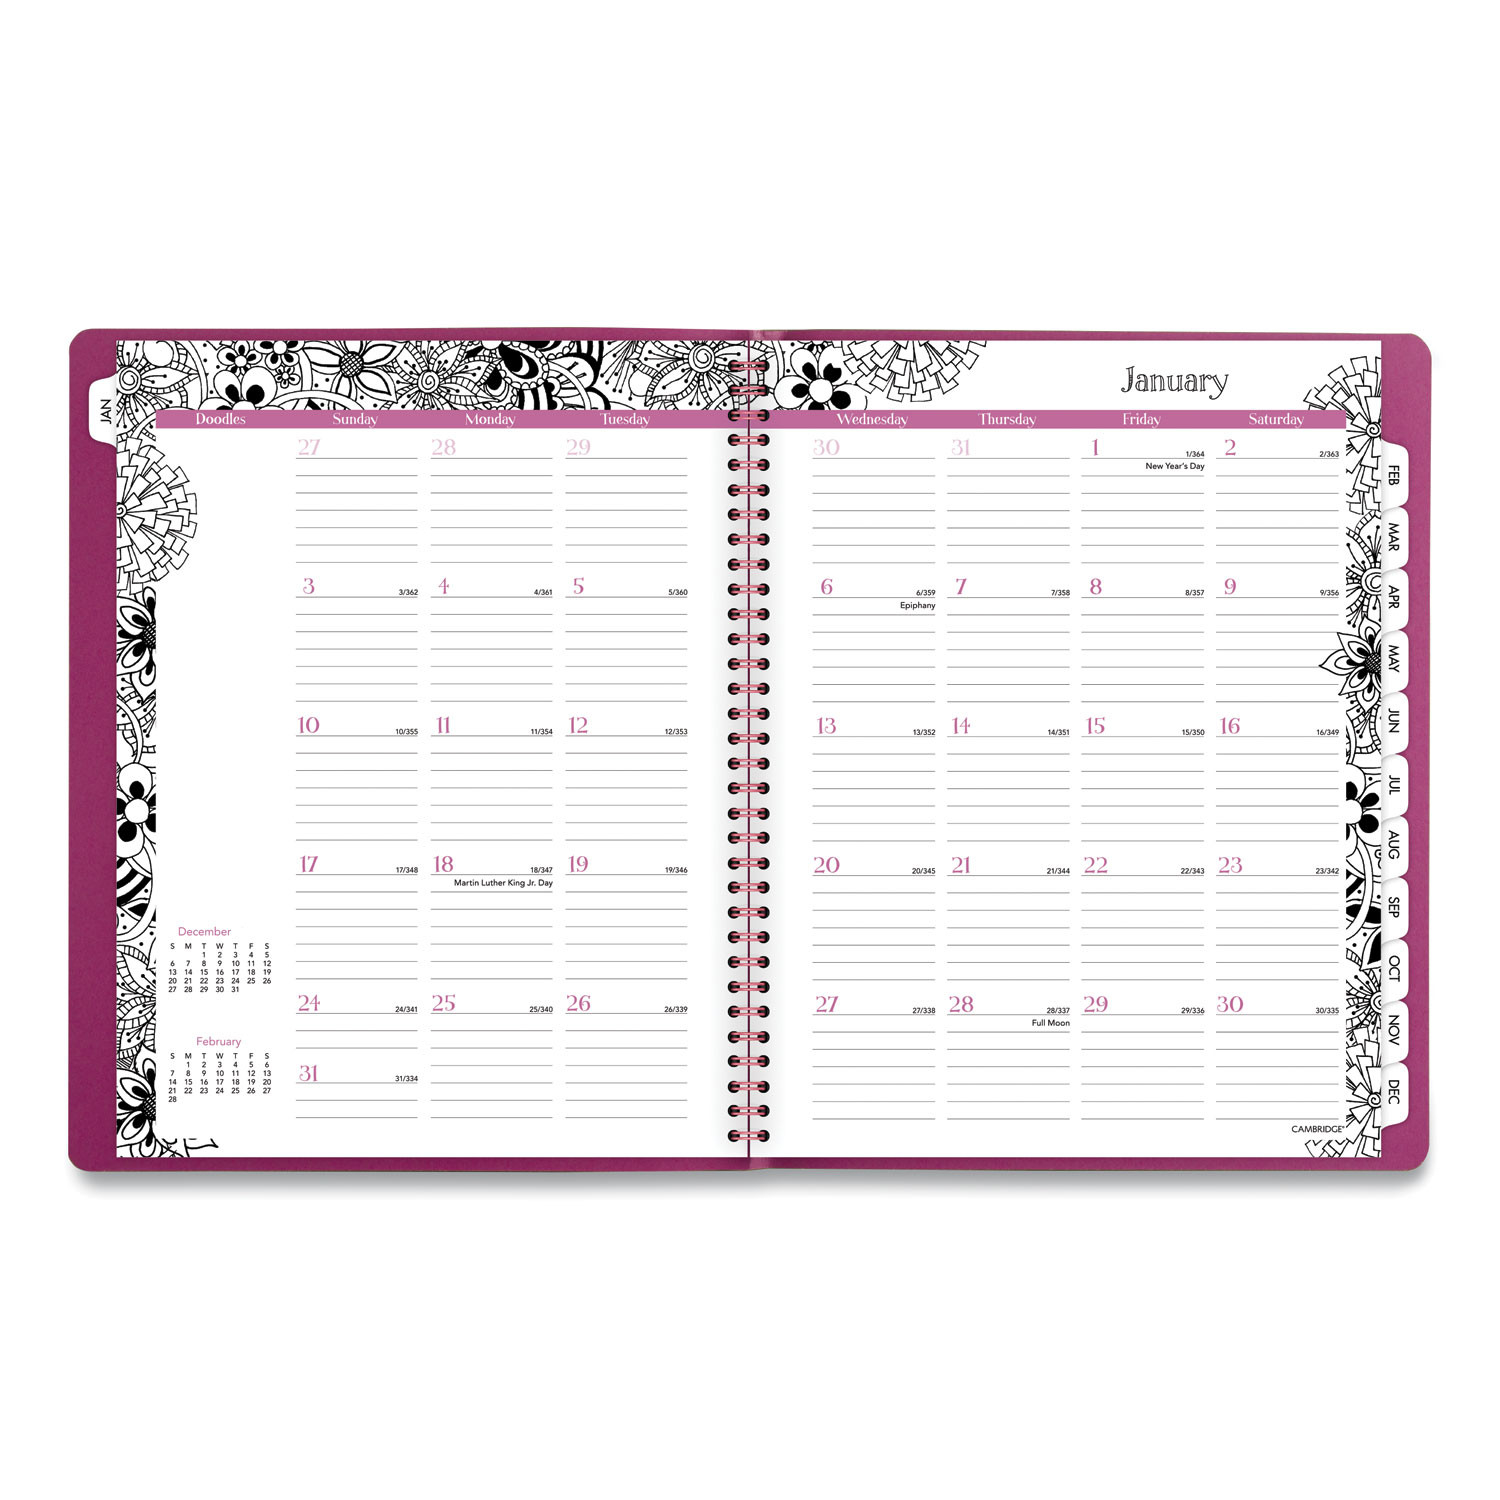 Aag589905 At-A-Glance Floradoodle Professional Weekly  Whats The Julian Date For 8/5/2021